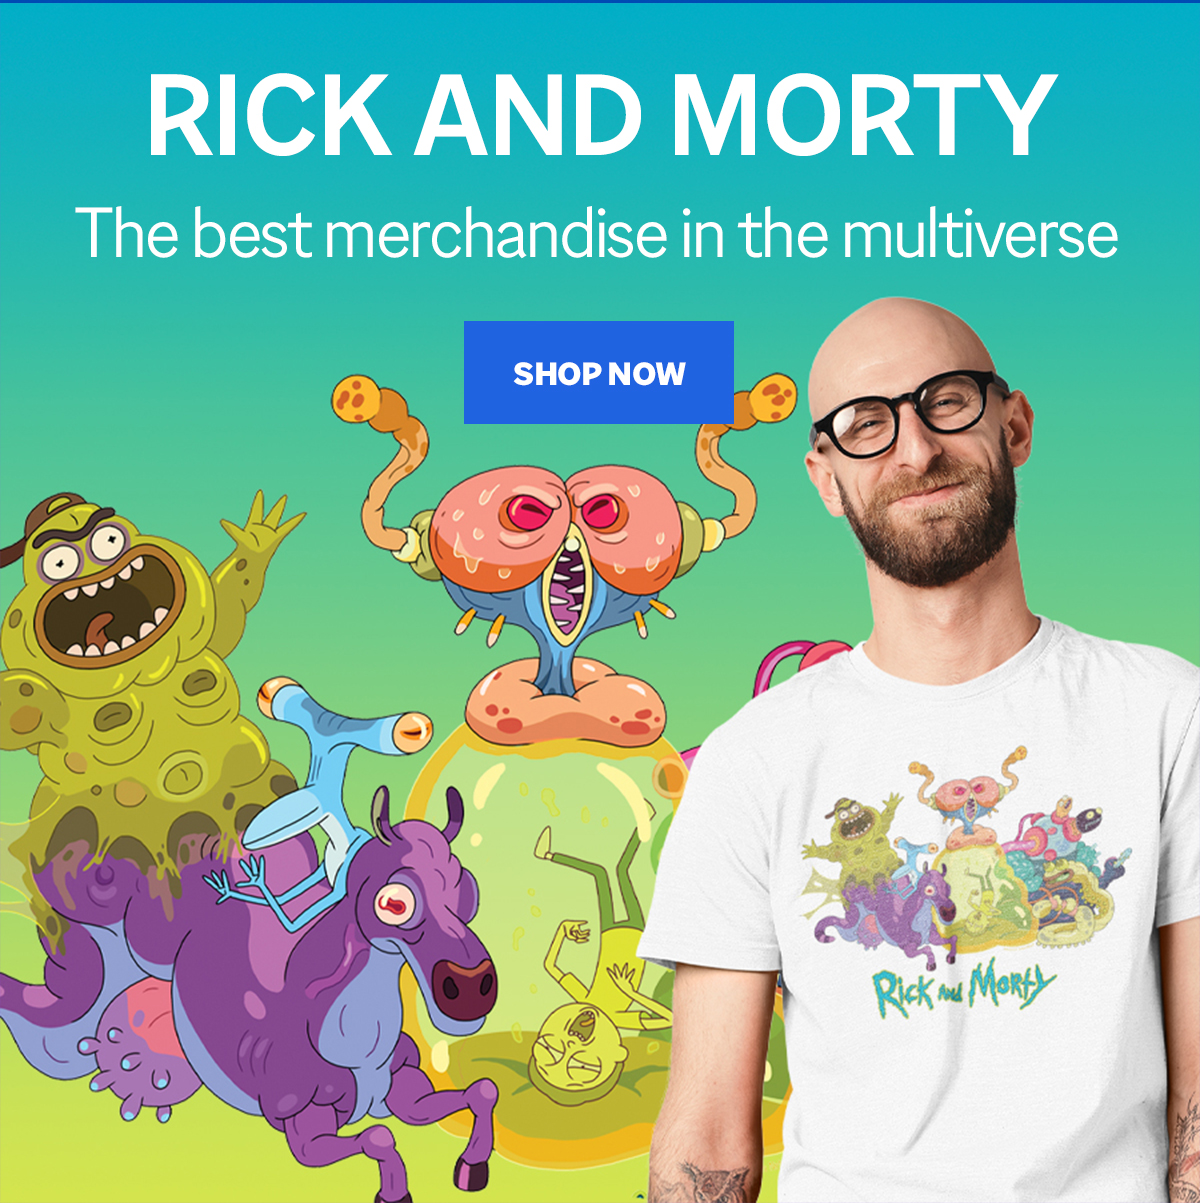 Construct A Bussiness With Rick And Morty Merchandise